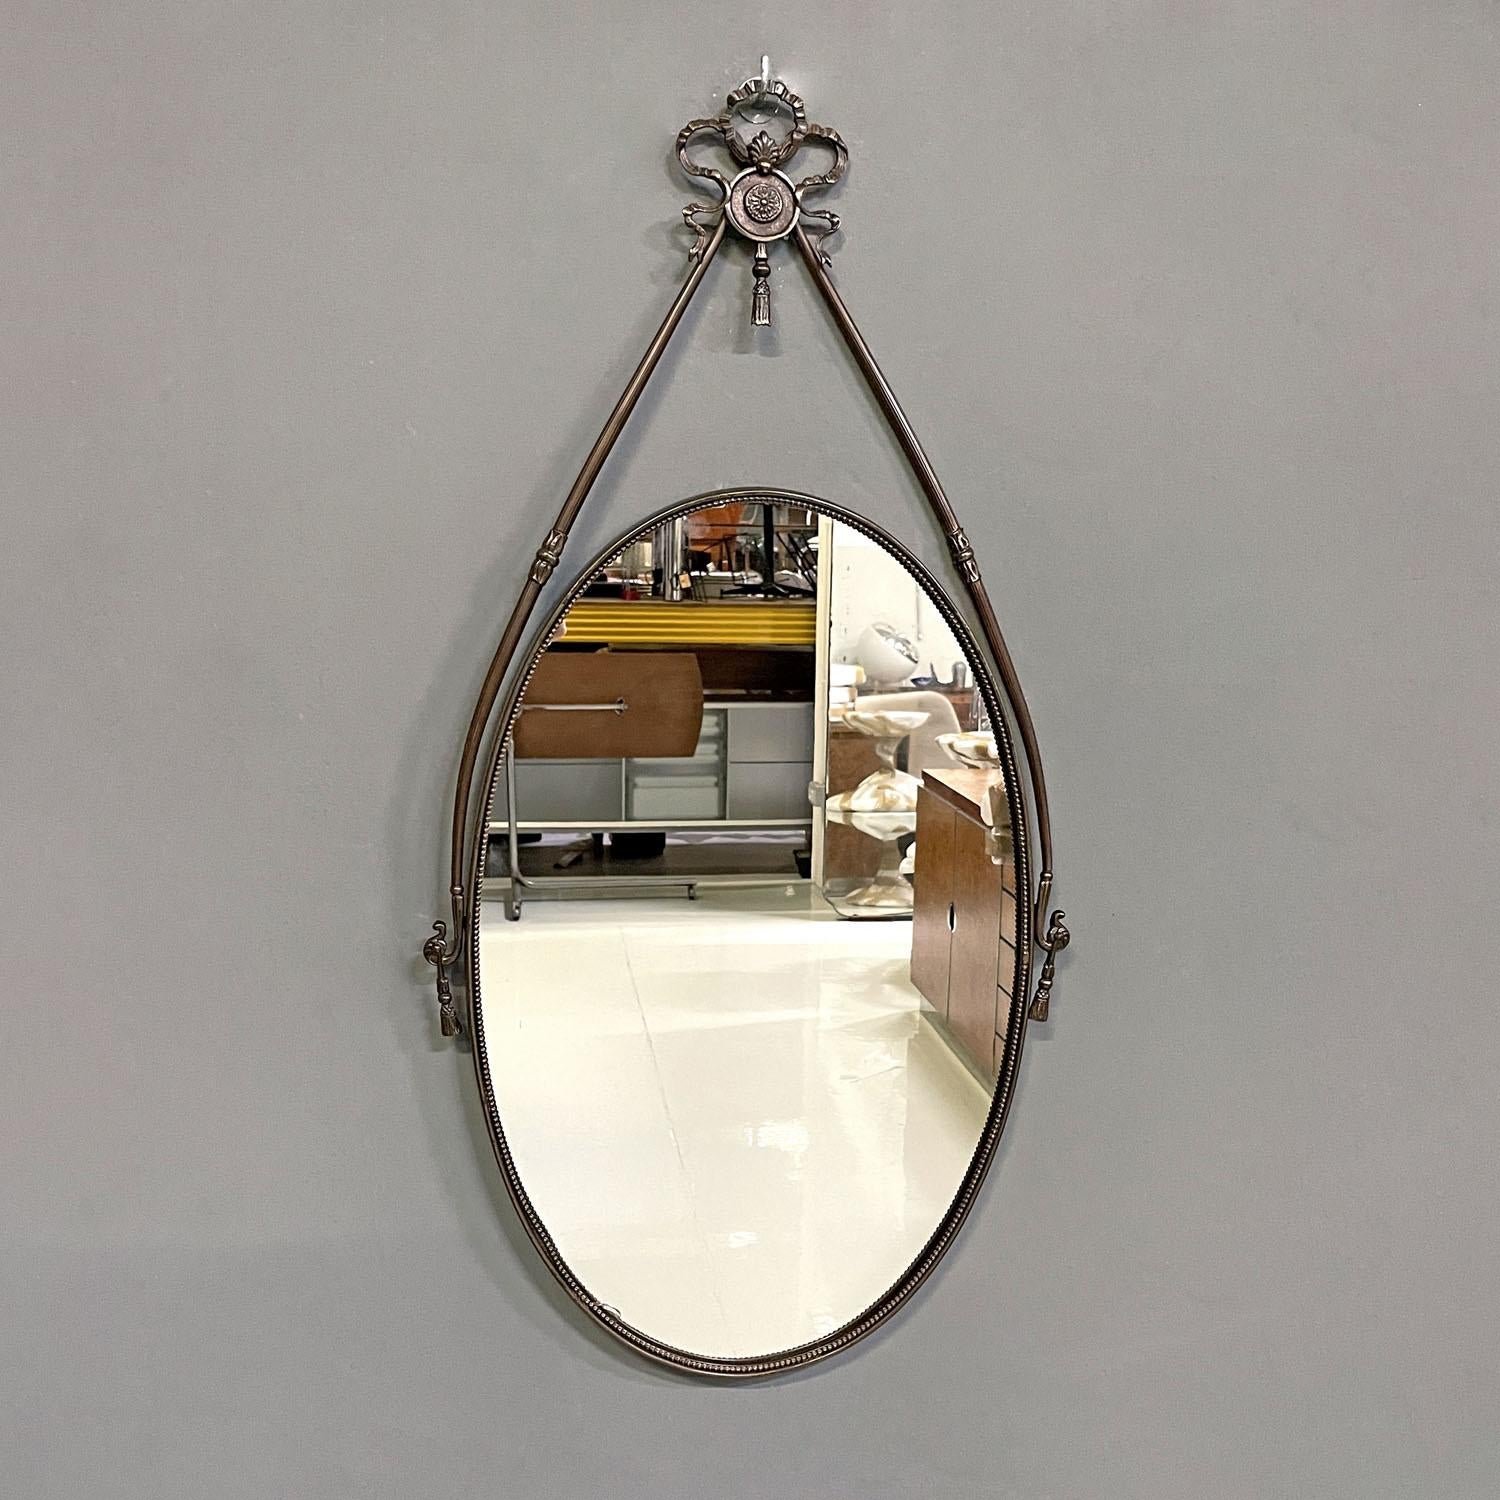 Italian mid-century modern brass wall mirror with ribbon and decorations, 1950s
Oval brass wall mirror. The load-bearing structure is composed of two decorated round-section arms joined at the top by a finely crafted bow-shaped decoration. The